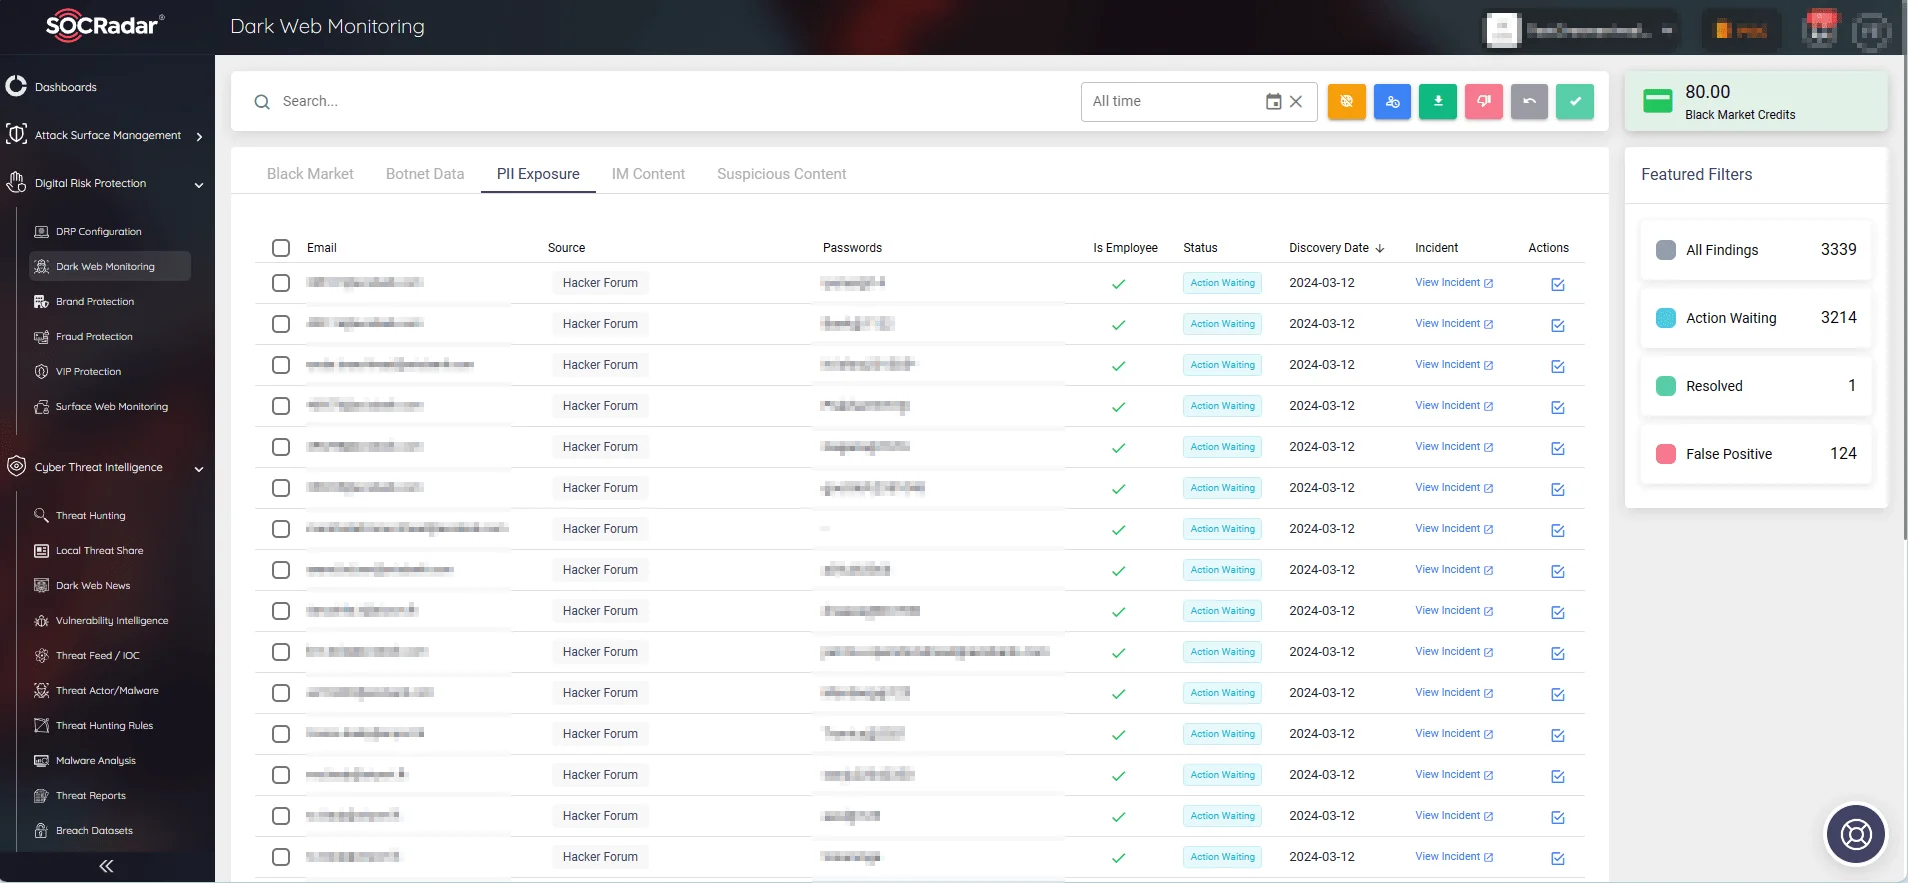 SOCRadar's Dark Web Monitoring helps you keep an eye out for potential exposures and threats.